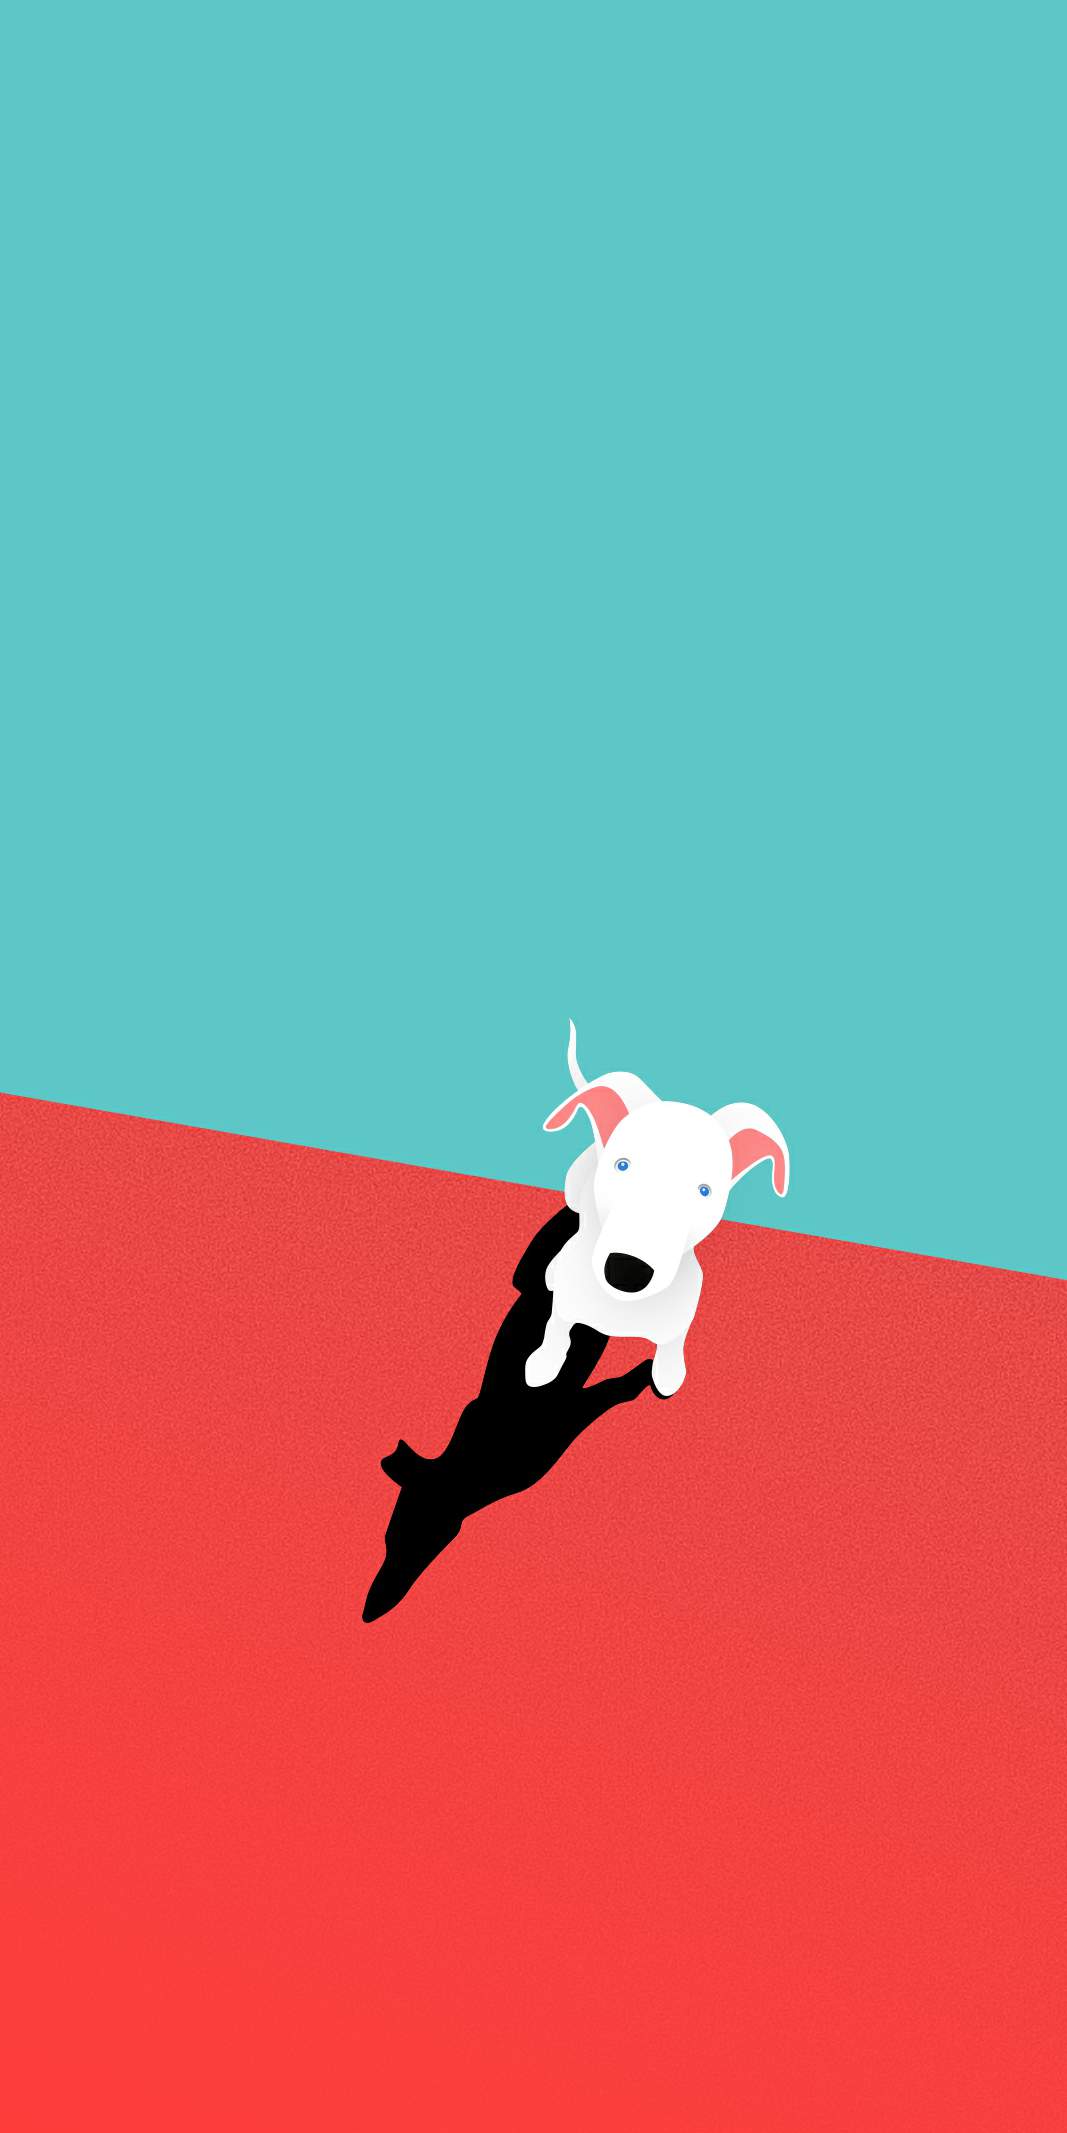 Minimal Dog IPhone Wallpaper - IPhone Wallpapers : iPhone Wallpapers